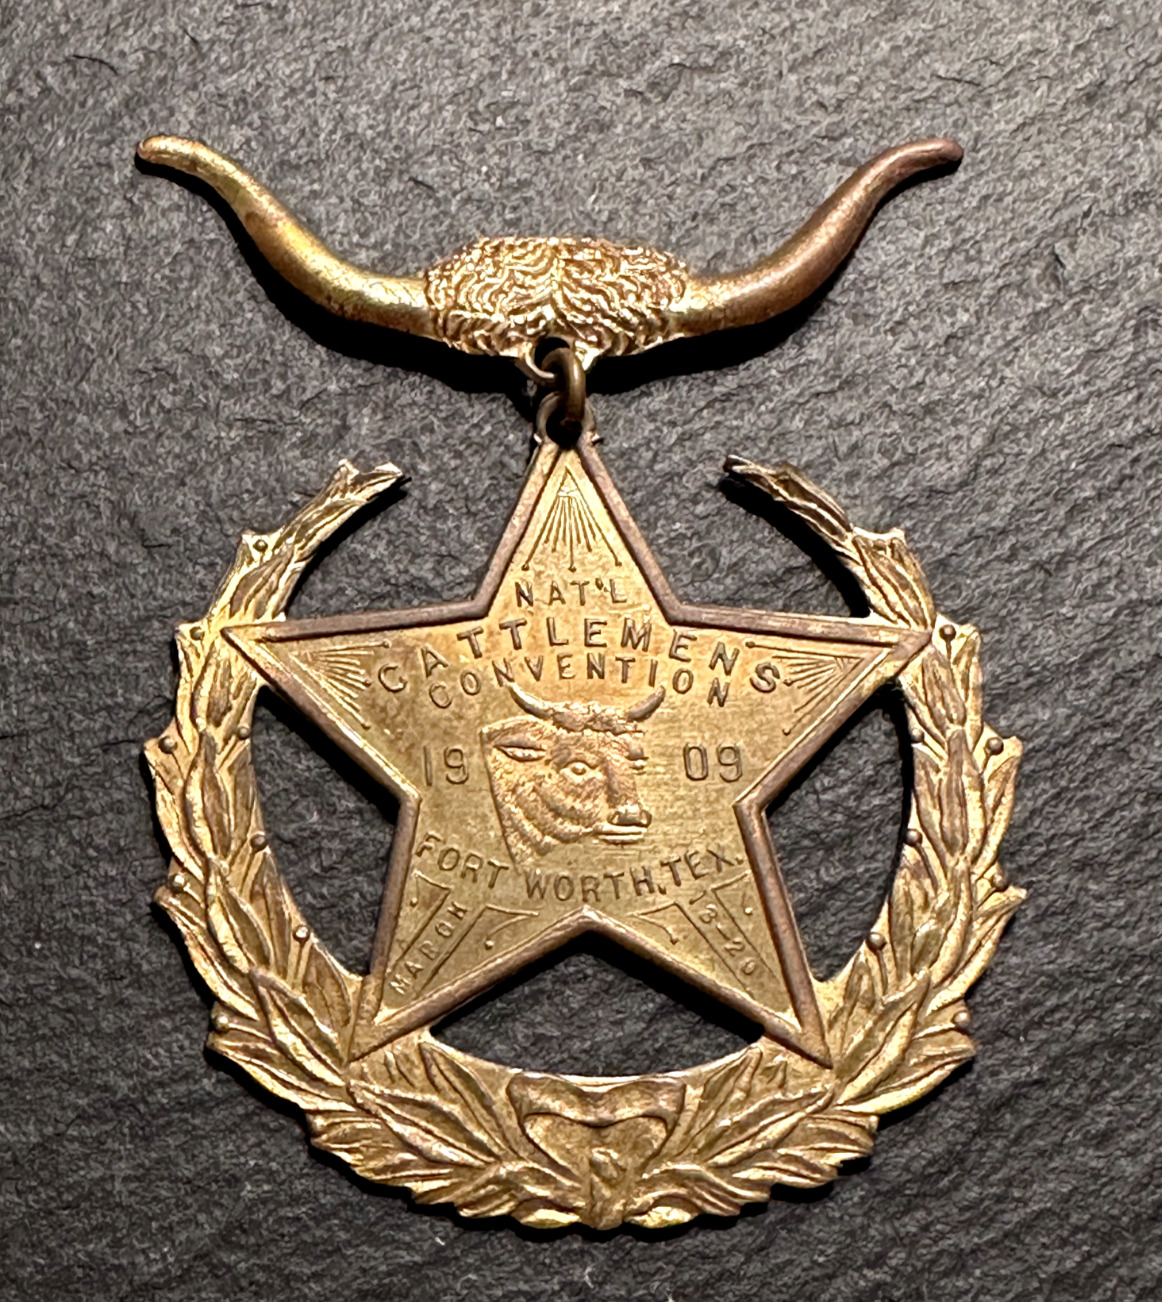 1909 NATIONAL CATTLEMEN'S CONVENTION FORT WORTH, TX METAL PIN D106